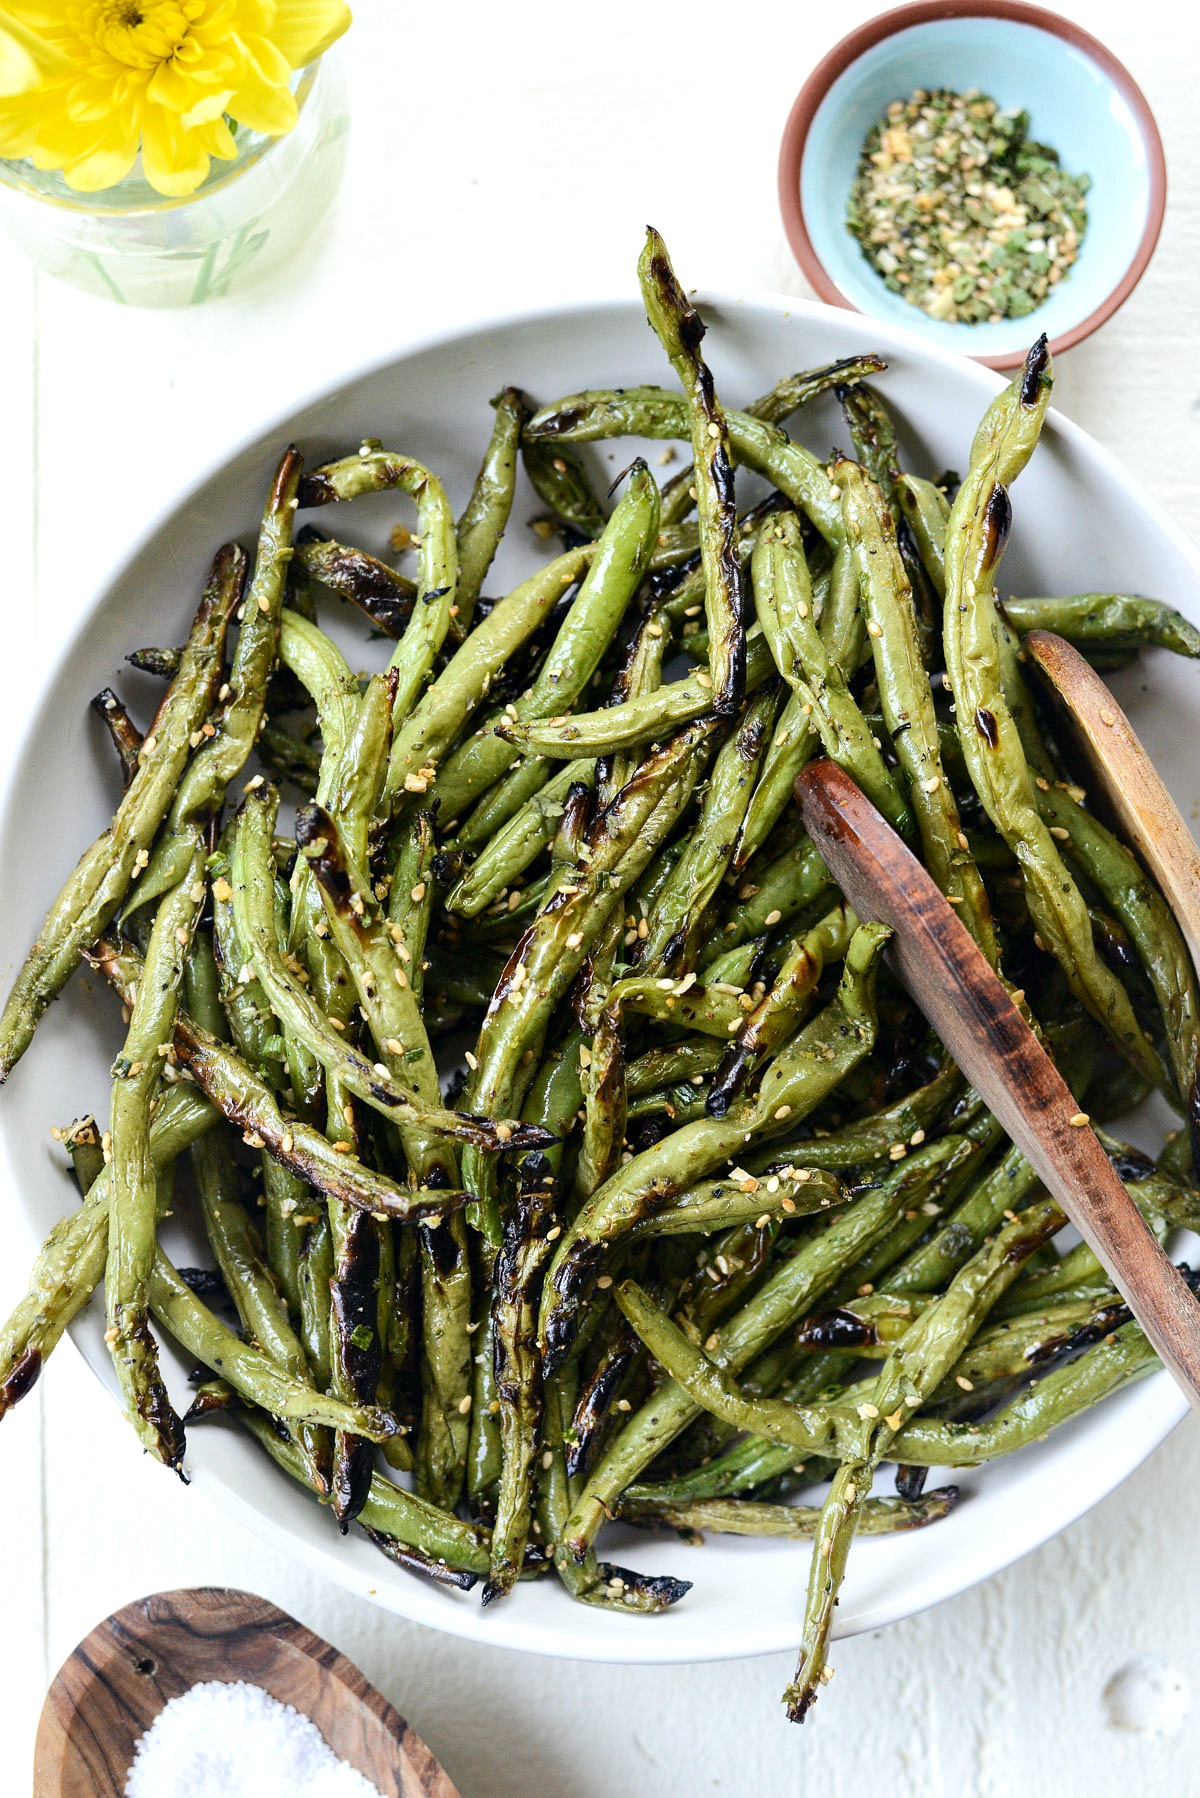 Feijão verde grelhado l SimplyScratch.com #grilling #grilling #grillled #greenbeans #healthy #easy #sidedish #howtogrill greenbeans